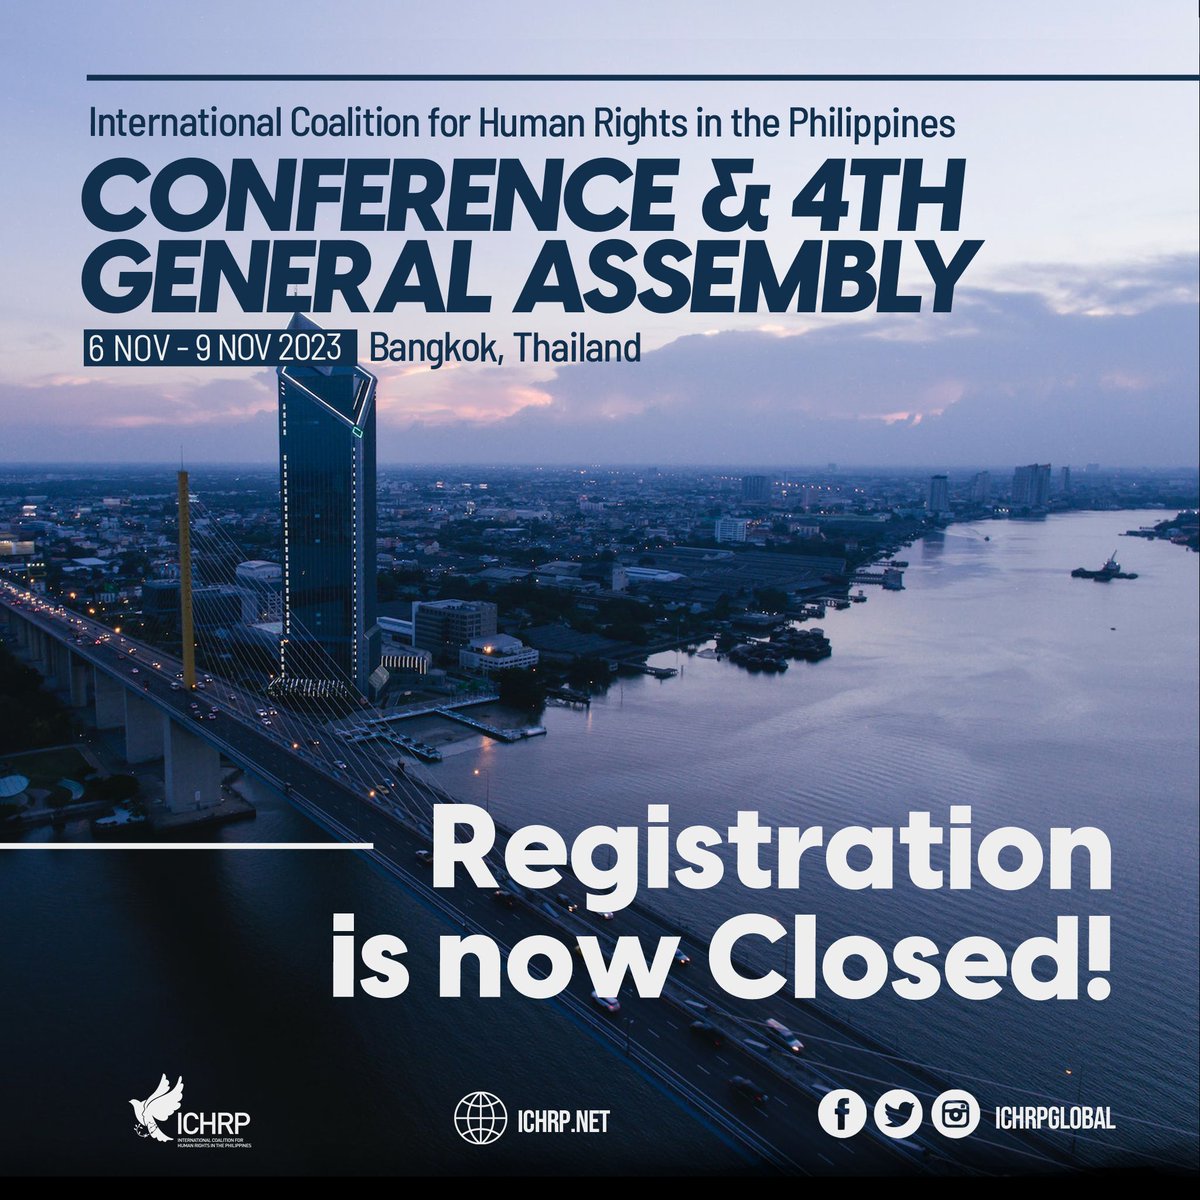 Registration is now closed for the upcoming Conference and 4th General Assembly of ICHRP, which is only two weeks away. The conference will take place in Bangkok from Nov 6 to 9, 2023. For those who have already registered, we look forward to having you join us next month!